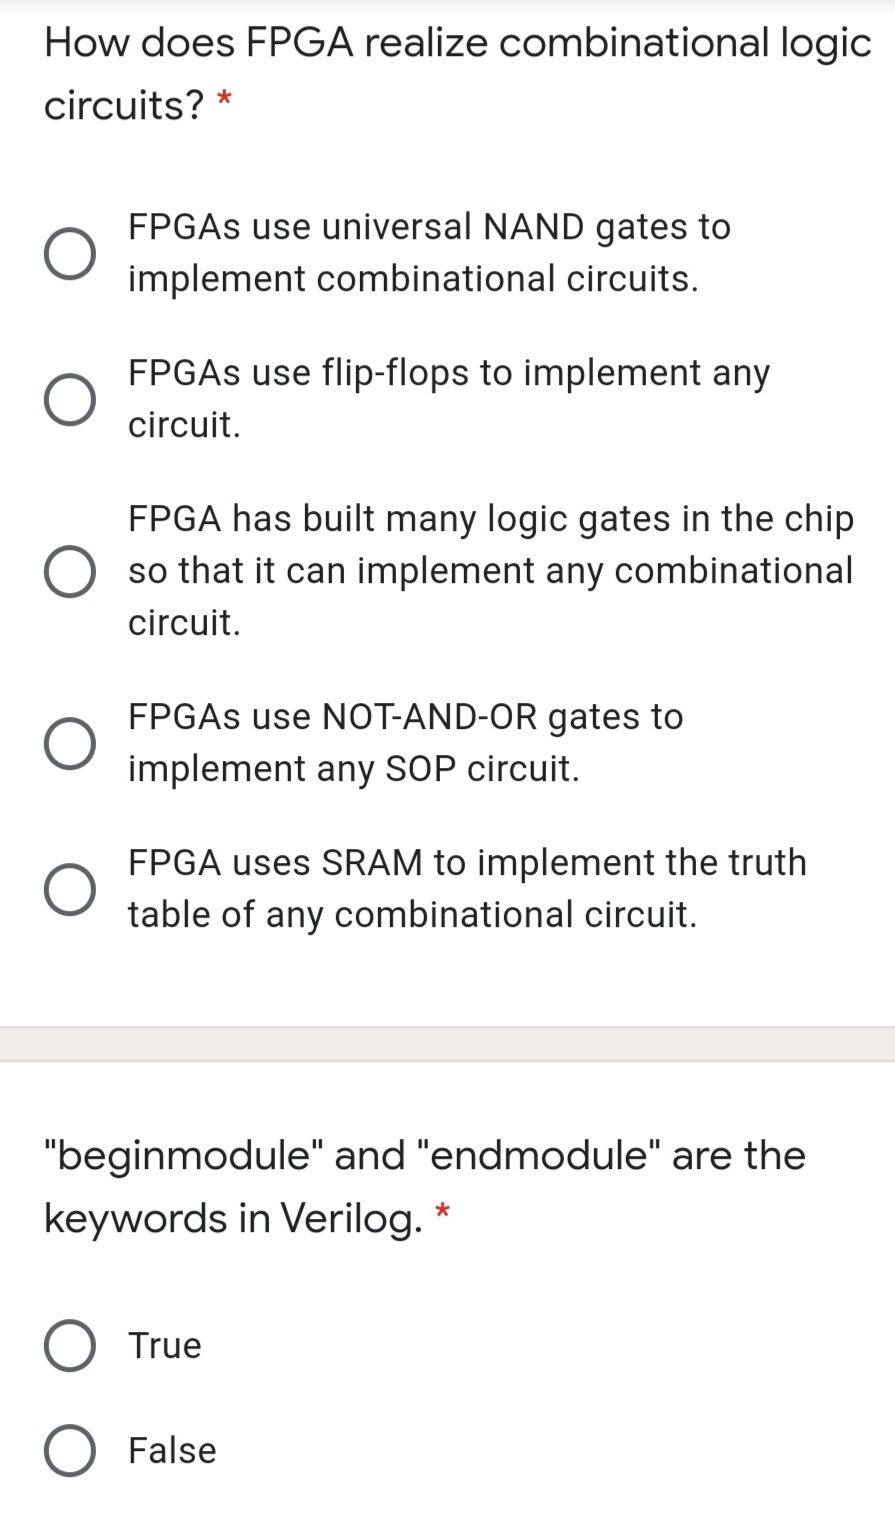 How does FPGA realize combinational logic
circuits? *
FPGAS use universal NAND gates to
implement combinational circuits.
FPGAS use flip-flops to implement any
circuit.
FPGA has built many logic gates in the chip
so that it can implement any combinational
circuit.
FPGAS use NOT-AND-OR gates to
implement any SOP circuit.
FPGA uses SRAM to implement the truth
table of any combinational circuit.
"beginmodule" and "endmodule" are the
keywords in Verilog.
O True
False
